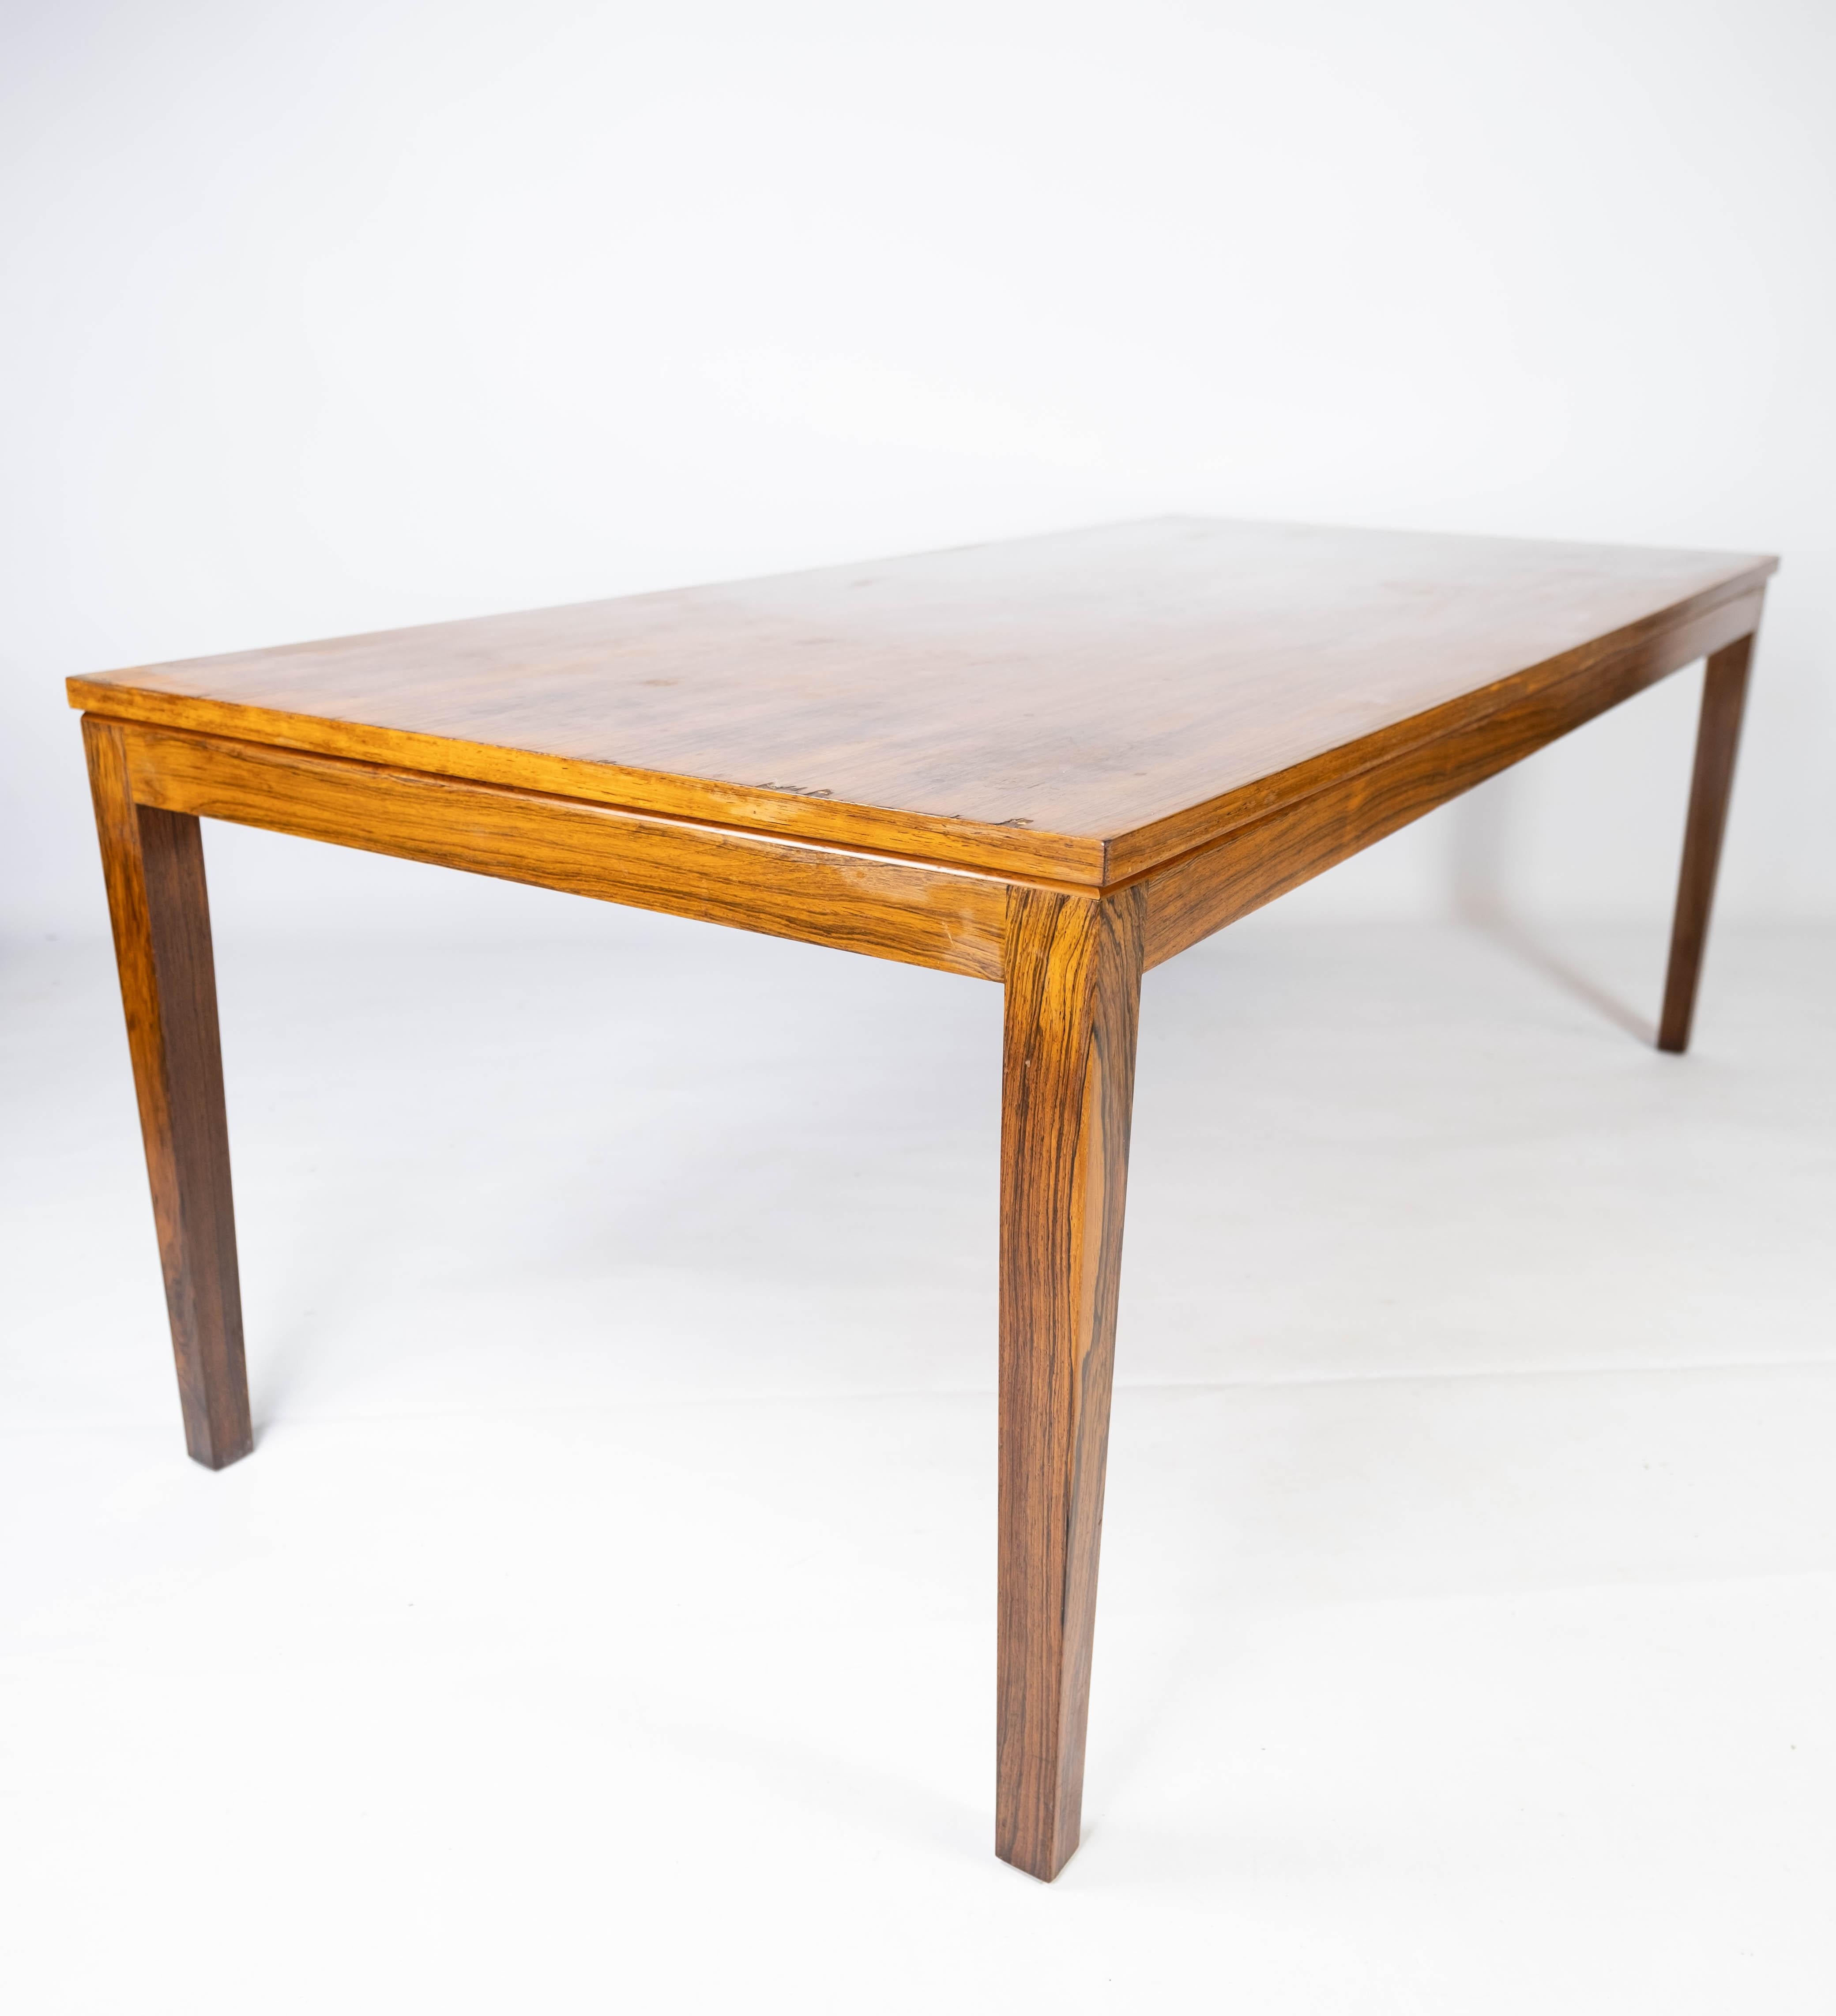 Mid-20th Century Coffee Table Made In Rosewood, Danish Design From 1960s For Sale